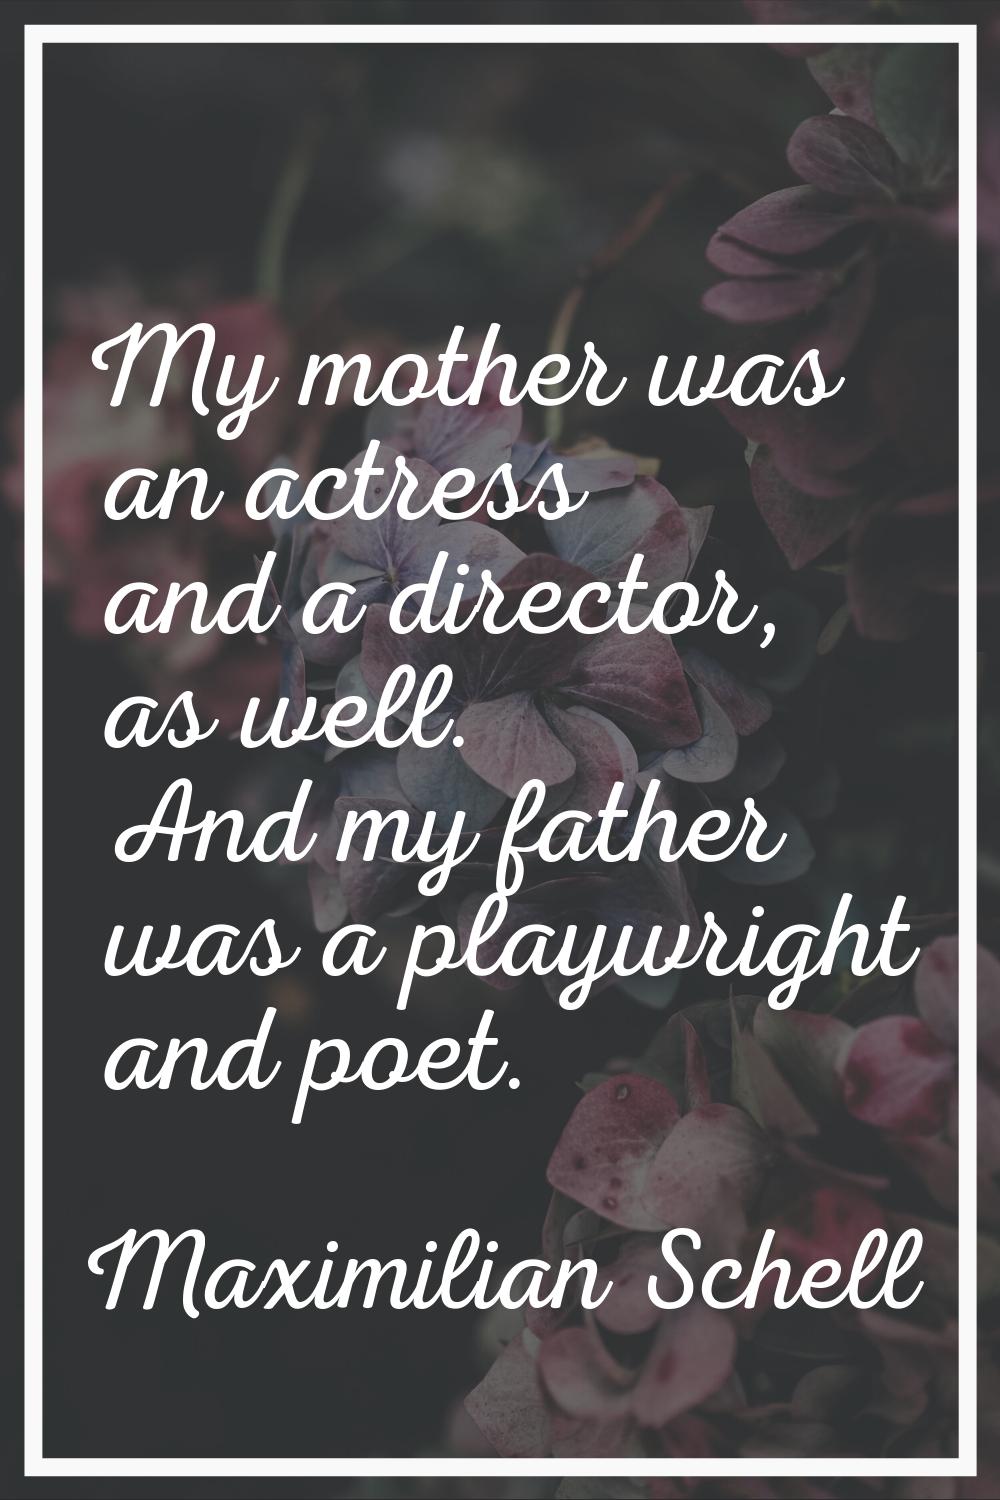 My mother was an actress and a director, as well. And my father was a playwright and poet.